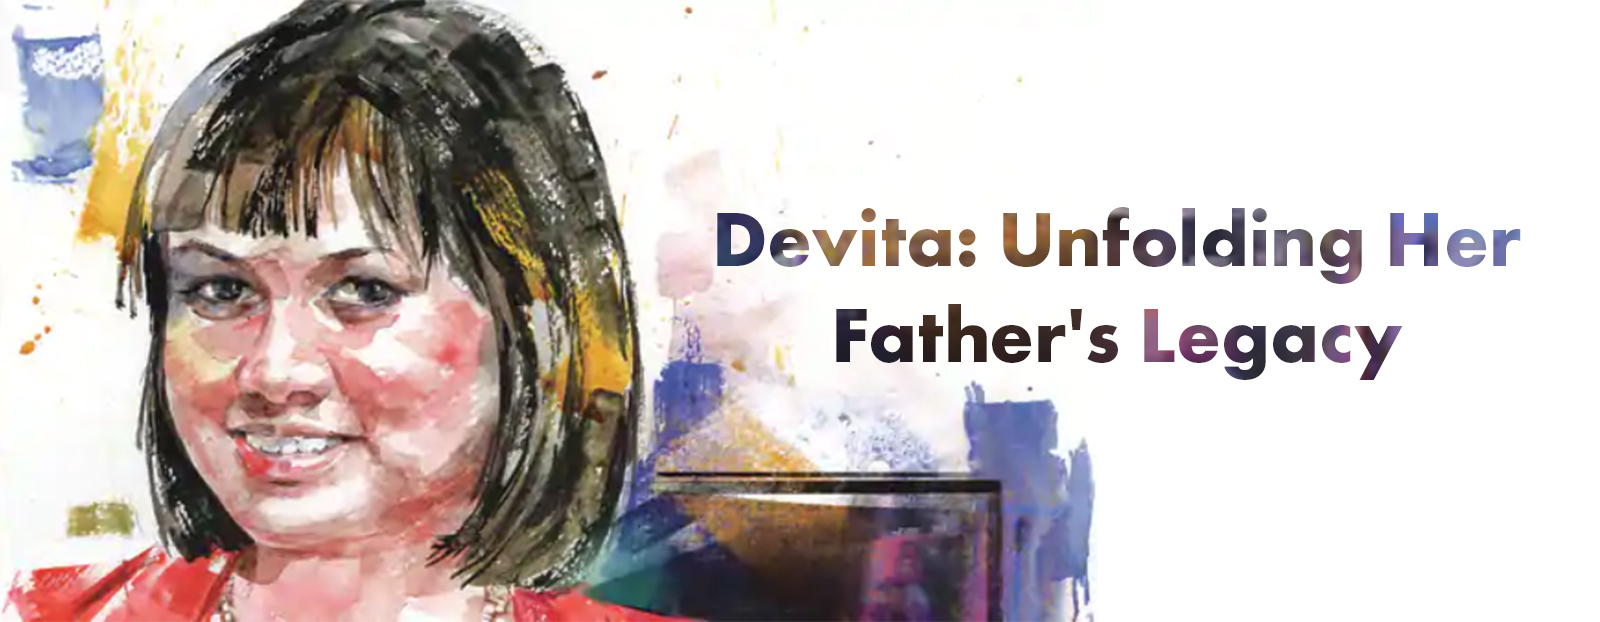 Devita: Unfolding Her Father’s legacy